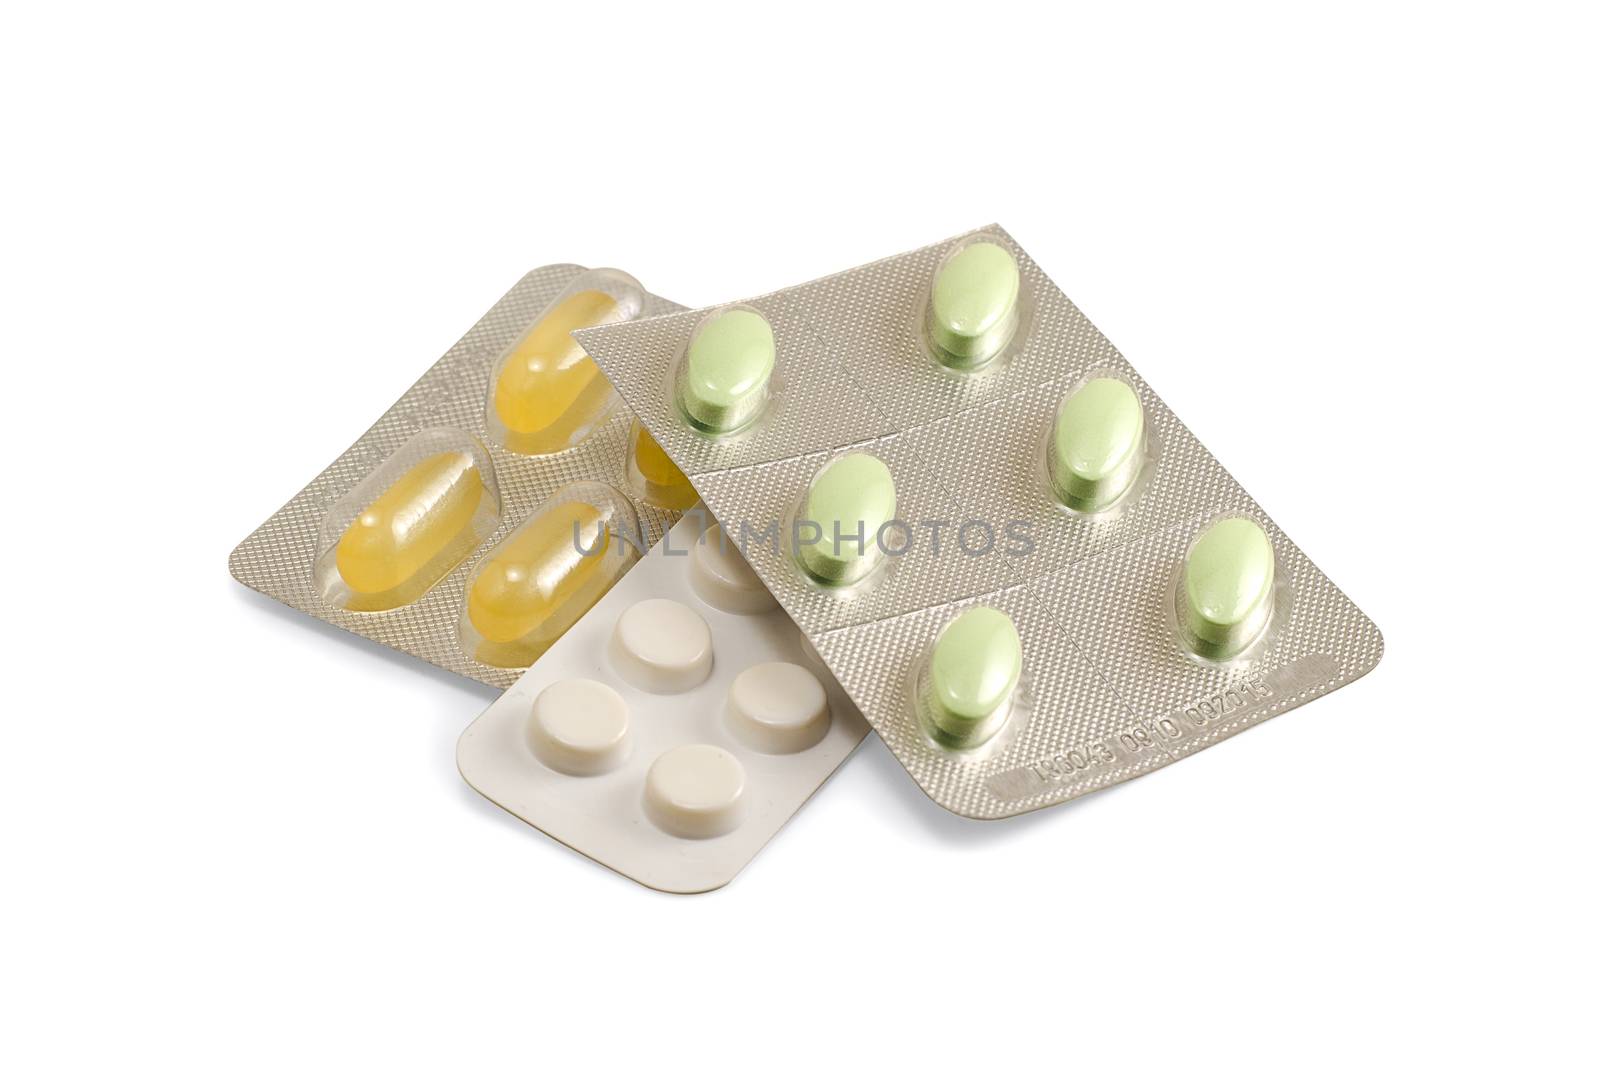 Image of a pills blisters on white background with shadow.